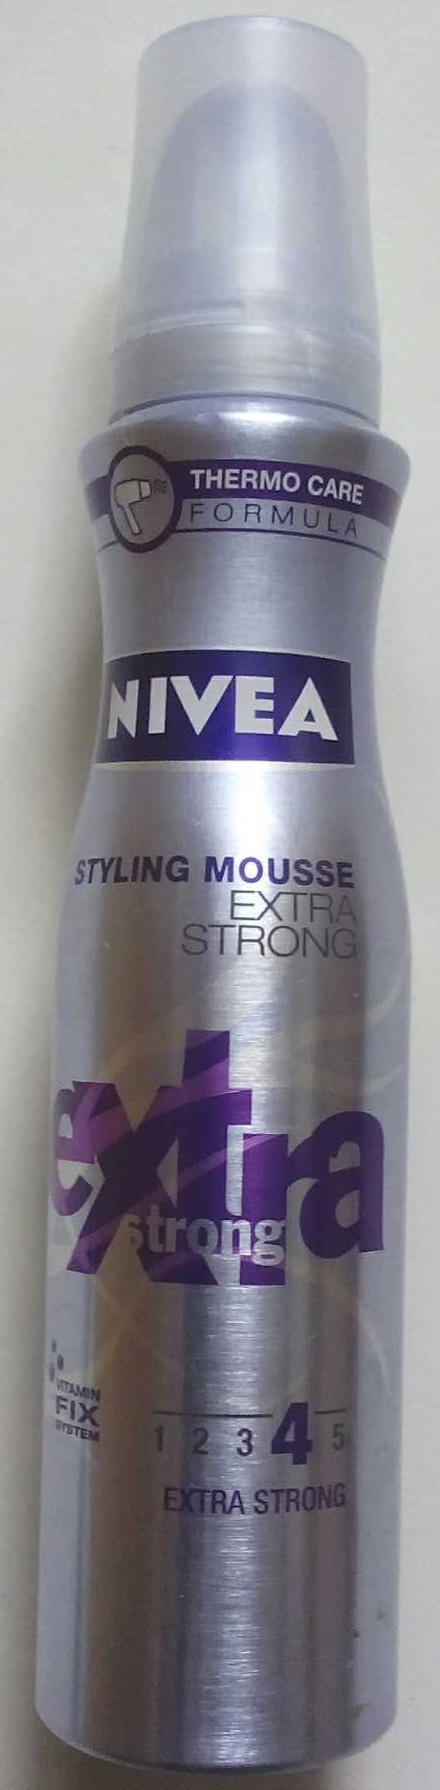 Styling mousse extra strong - Product - fr